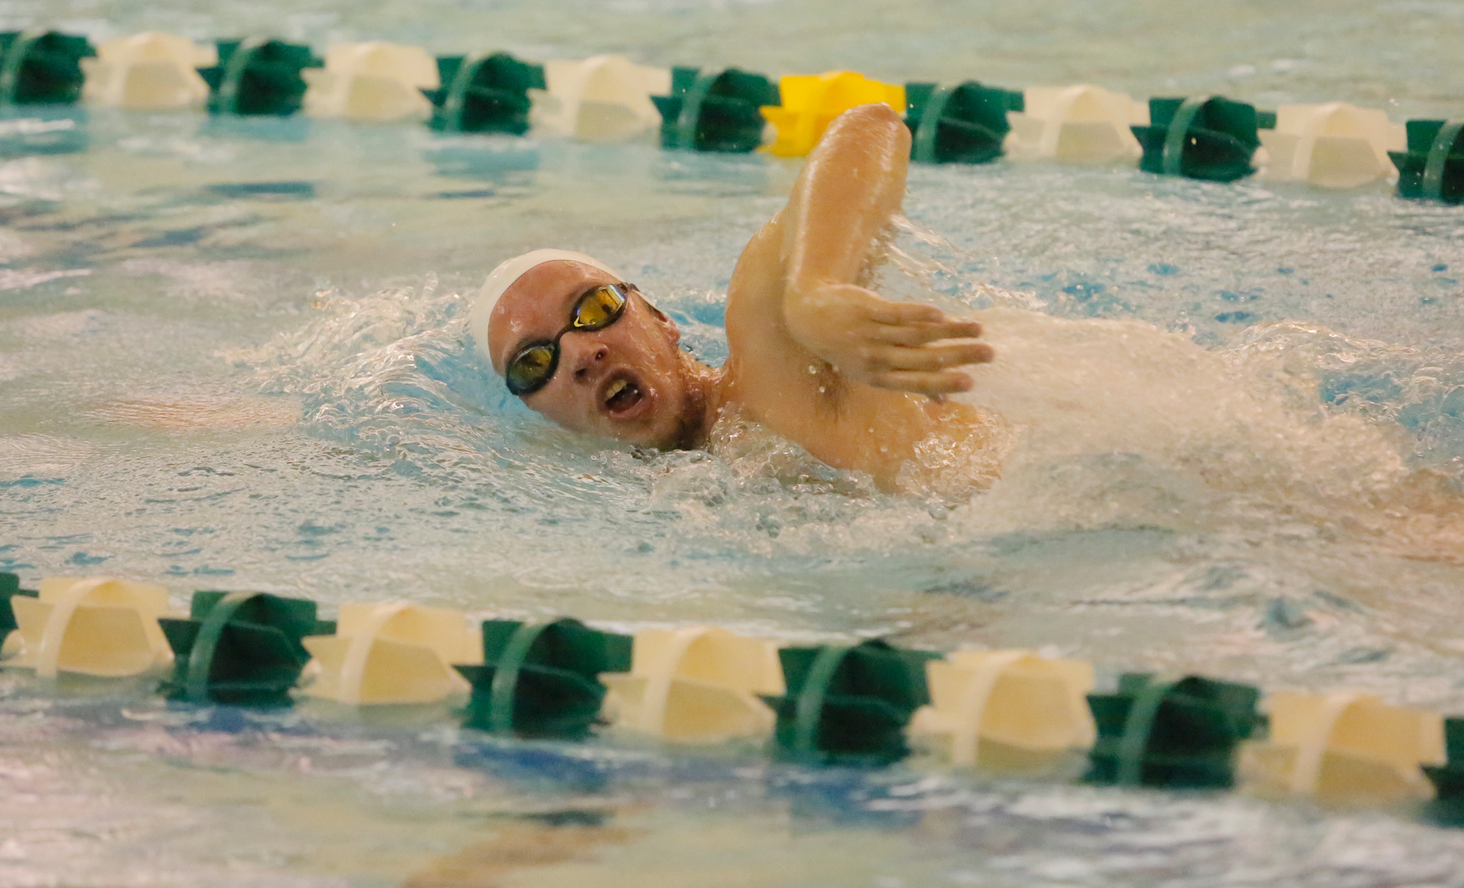 Swimming & Diving teams defeated by Washington & Jefferson